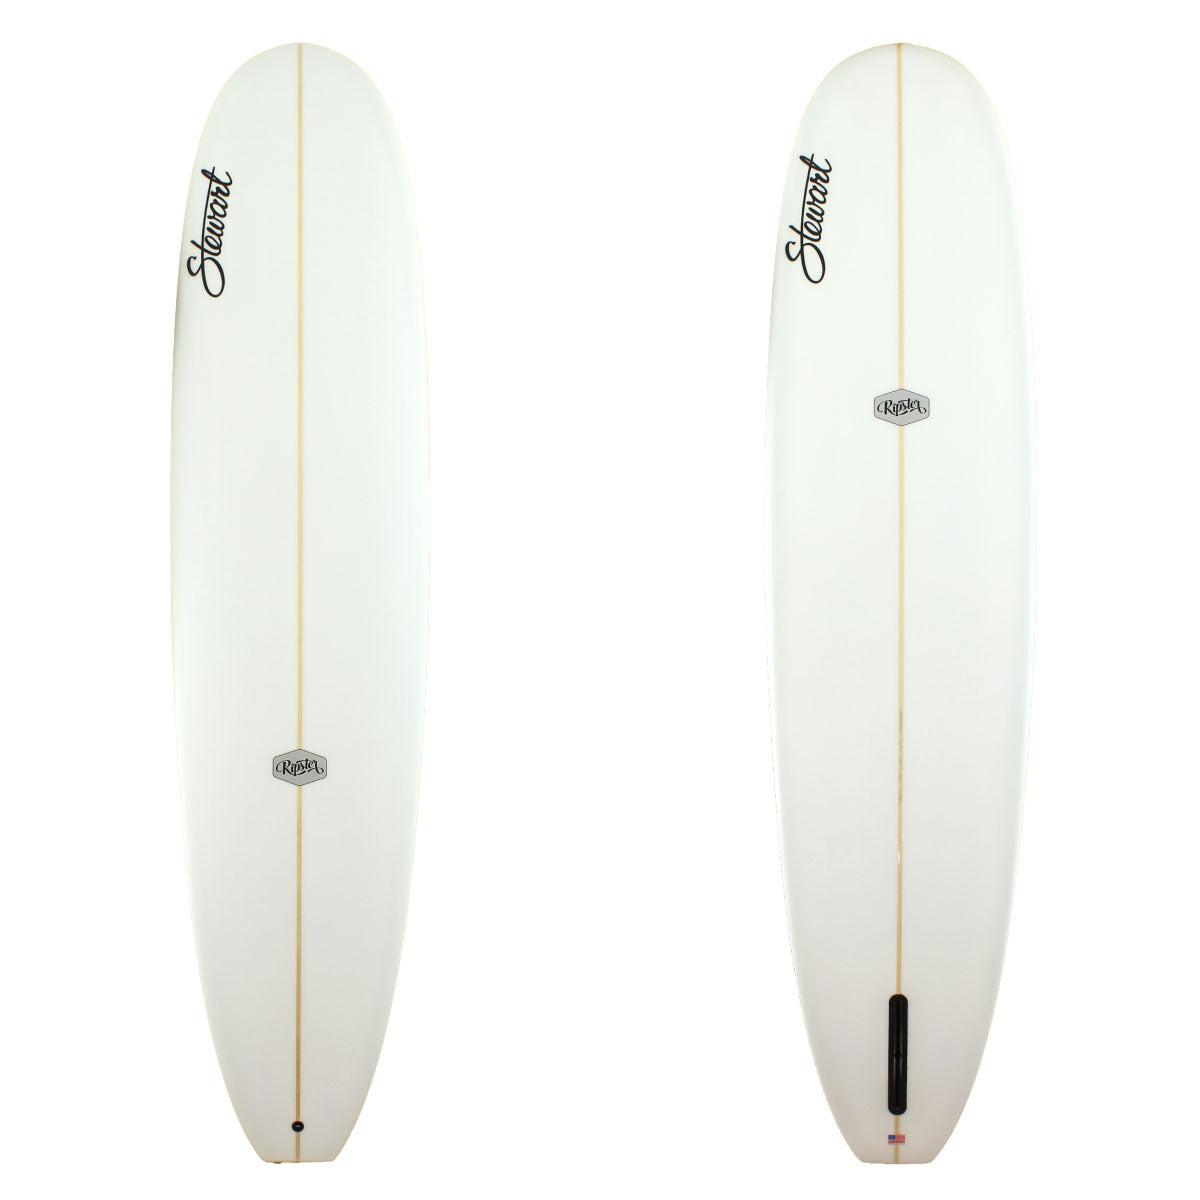 Stewart Surfboards 9'0 Ripster with clear white bottom and rails